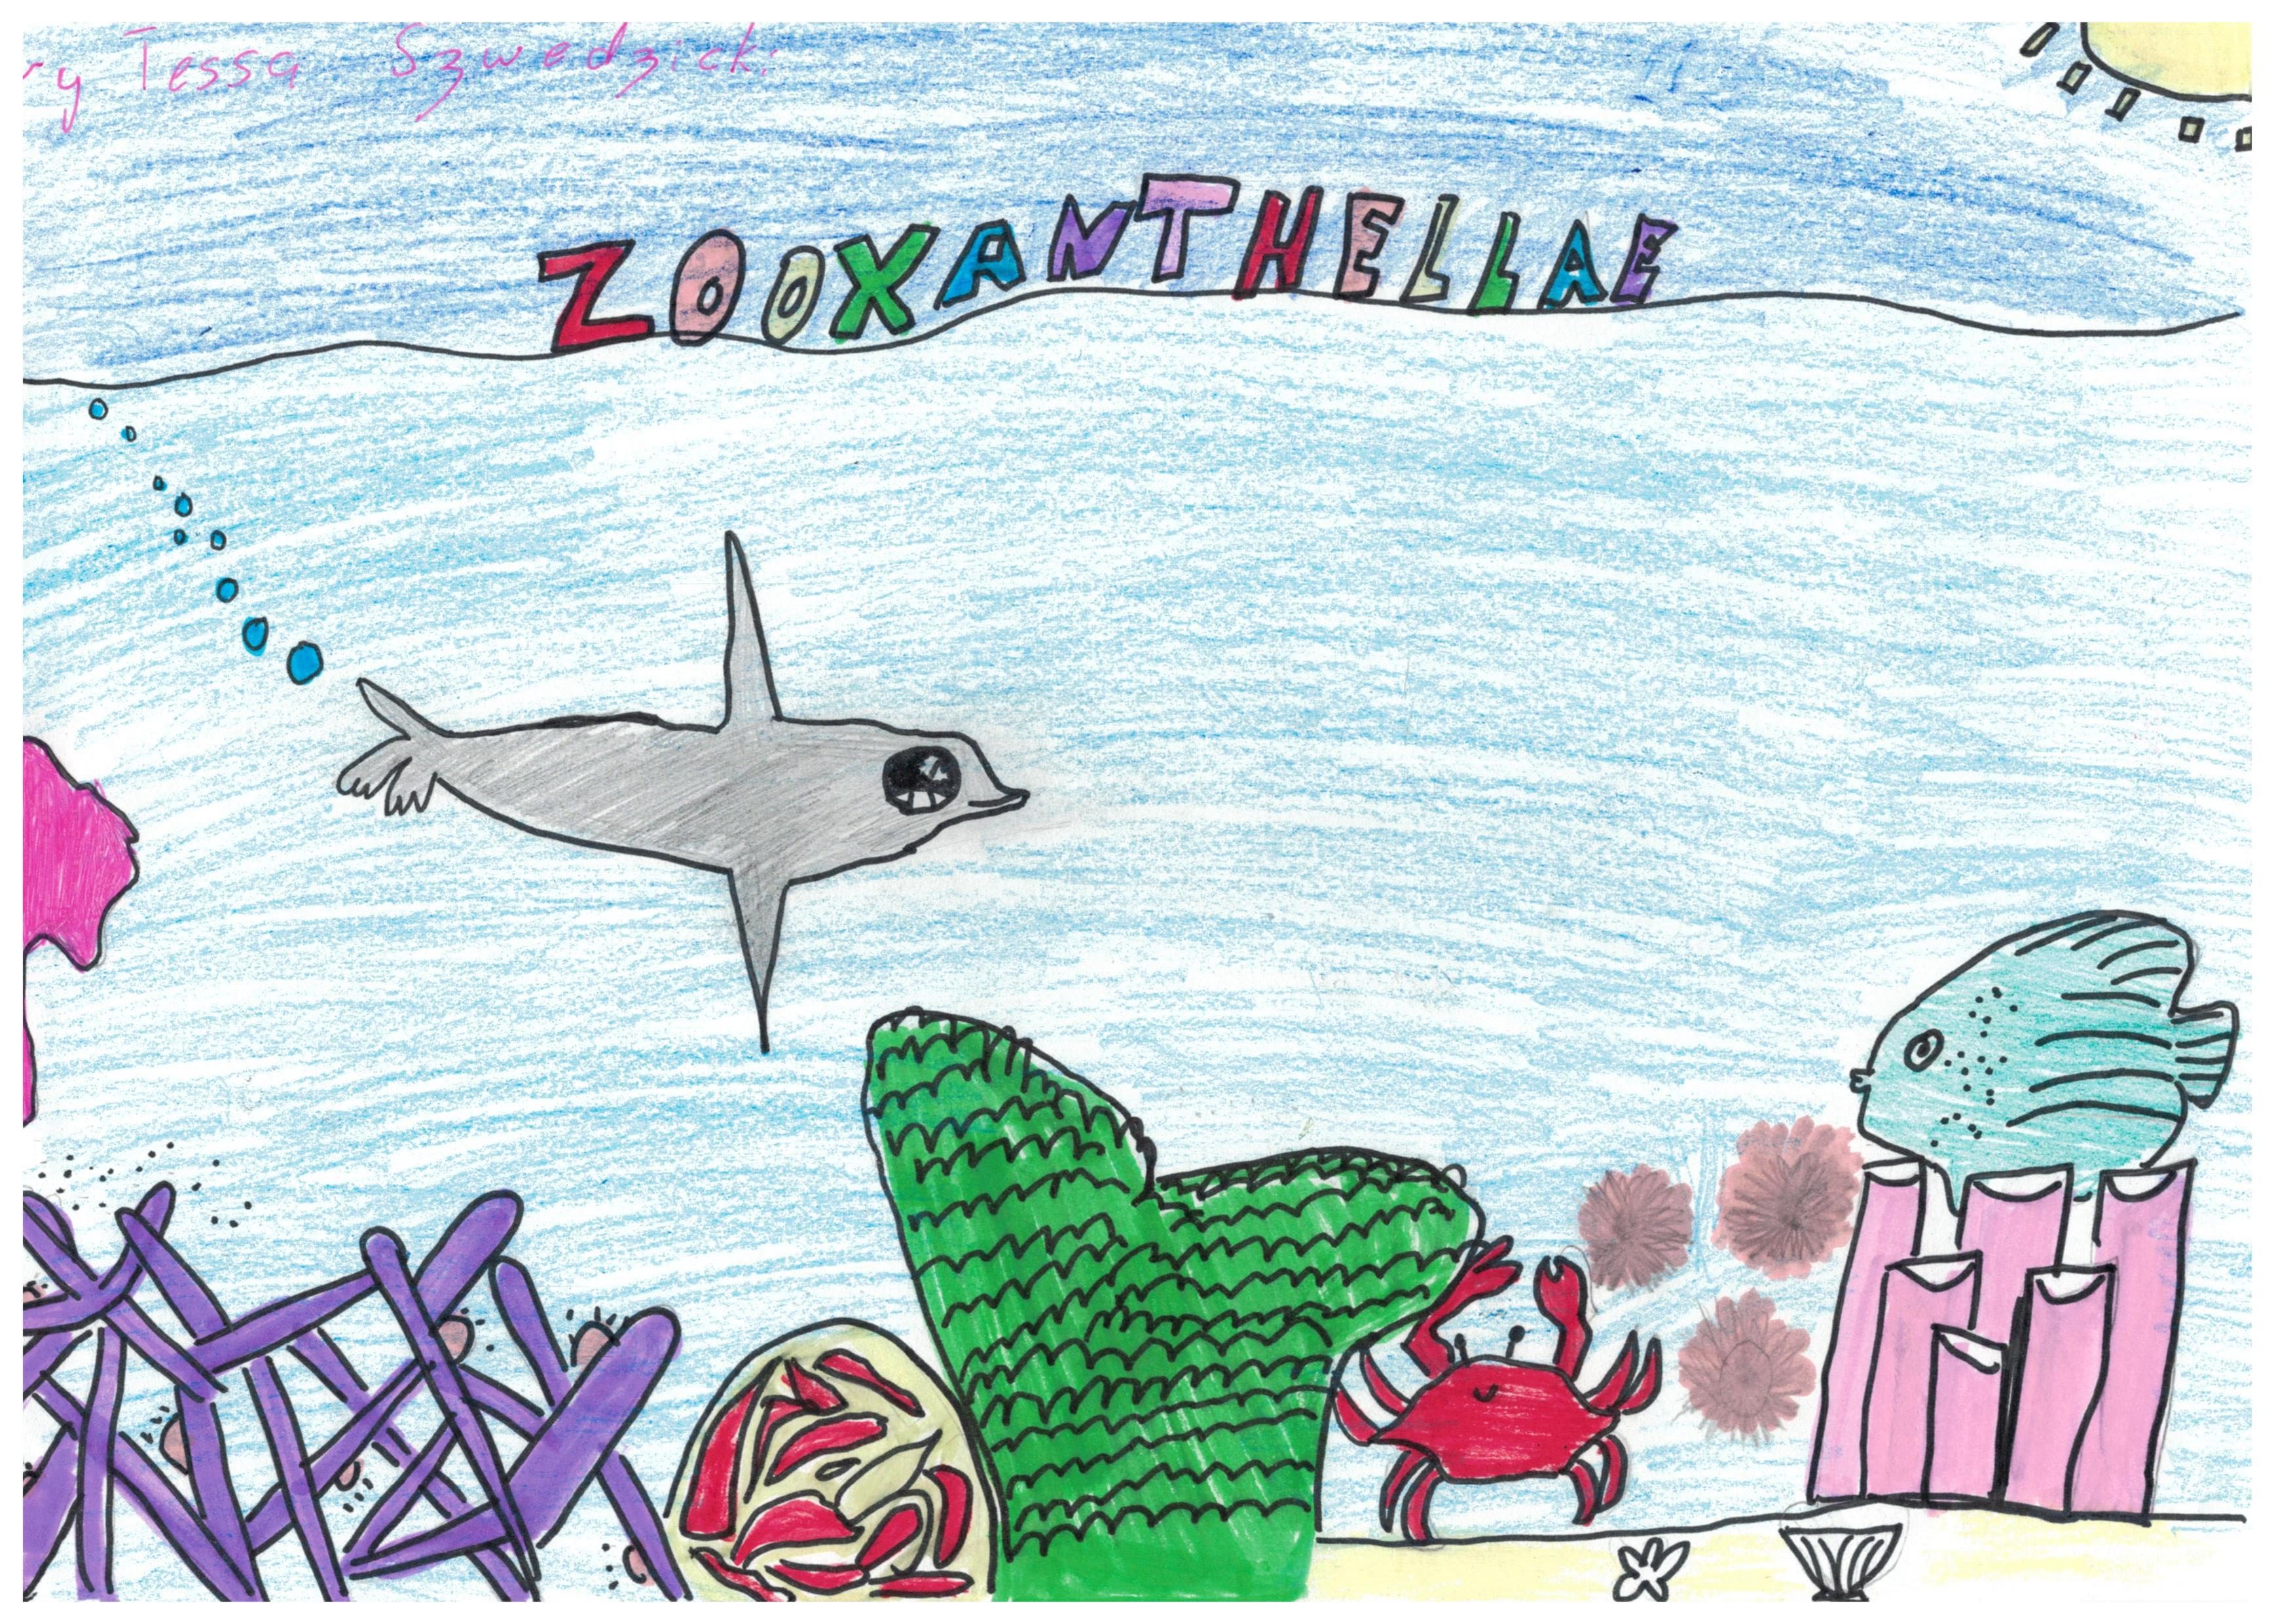 Zooxanthellae - Kids Care About Climate Change 2021